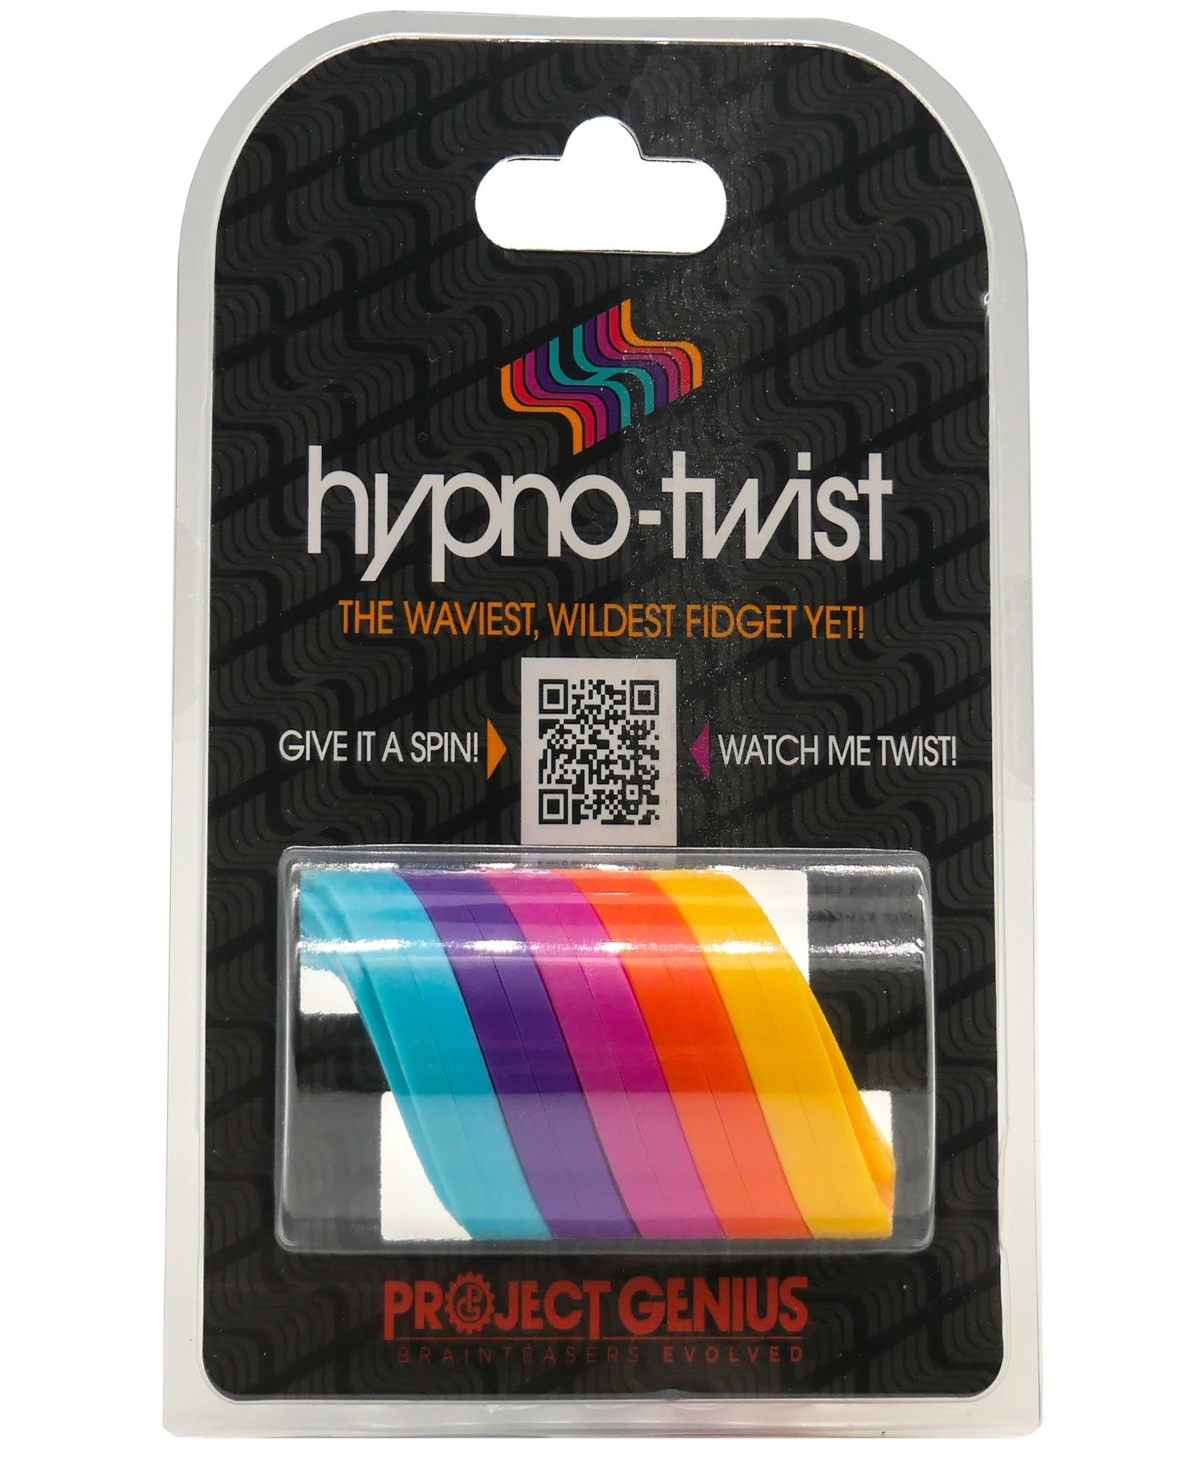 Project Genius Kids' Hypno-twist Hypnotic Fidget Toy, Glide The Colorful Rings For A Hypnotic Loop That Spins Again And A In Multi